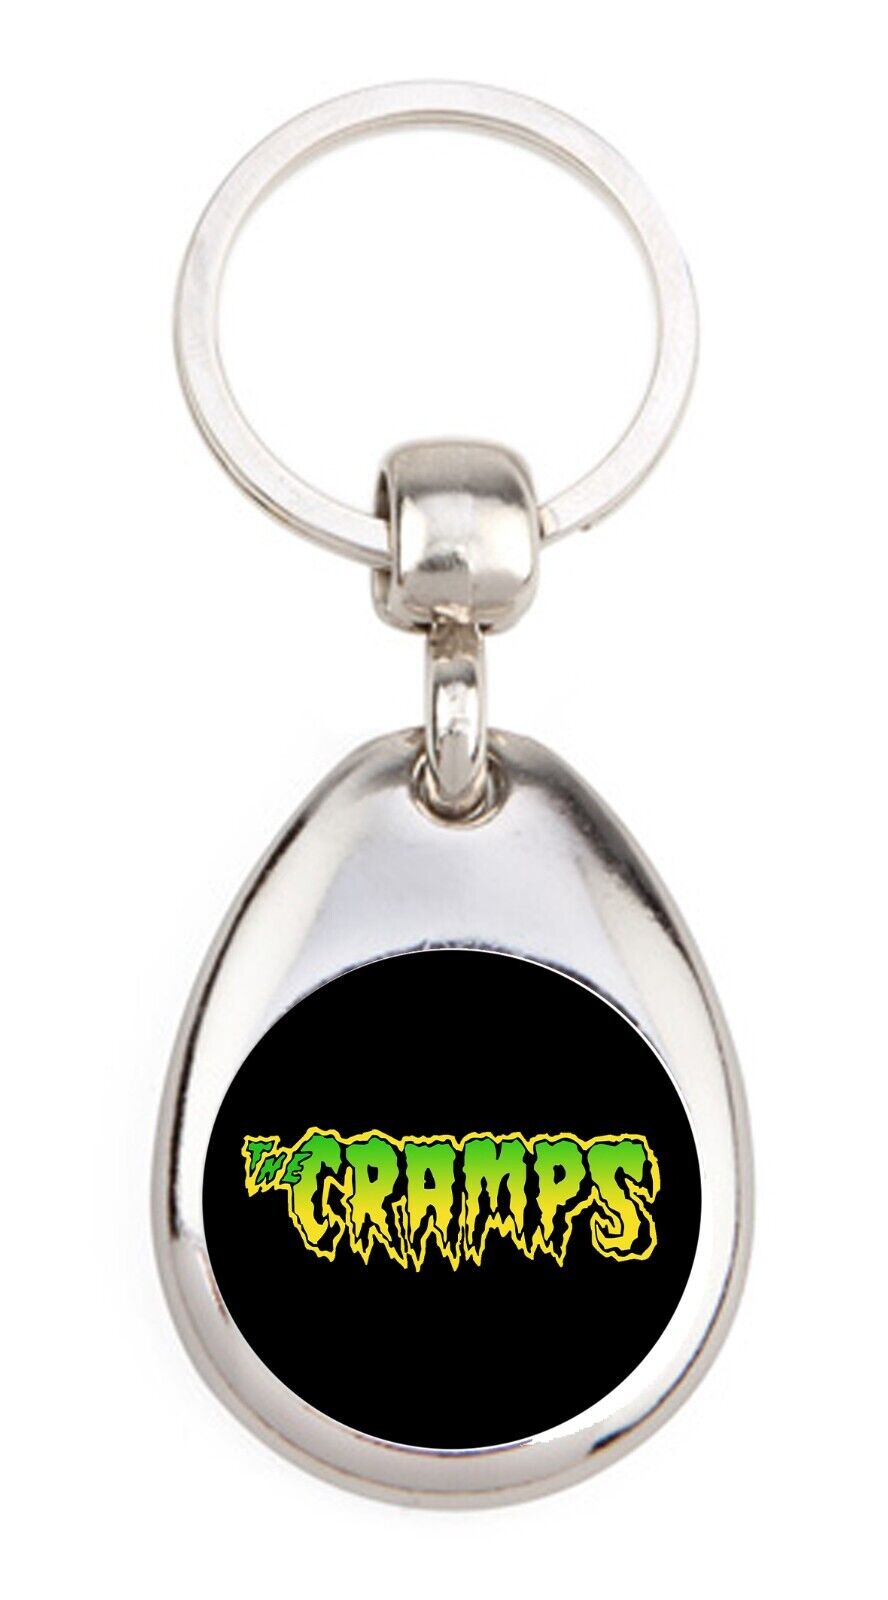 The Cramps Punk Rock Cult Metal Keychain